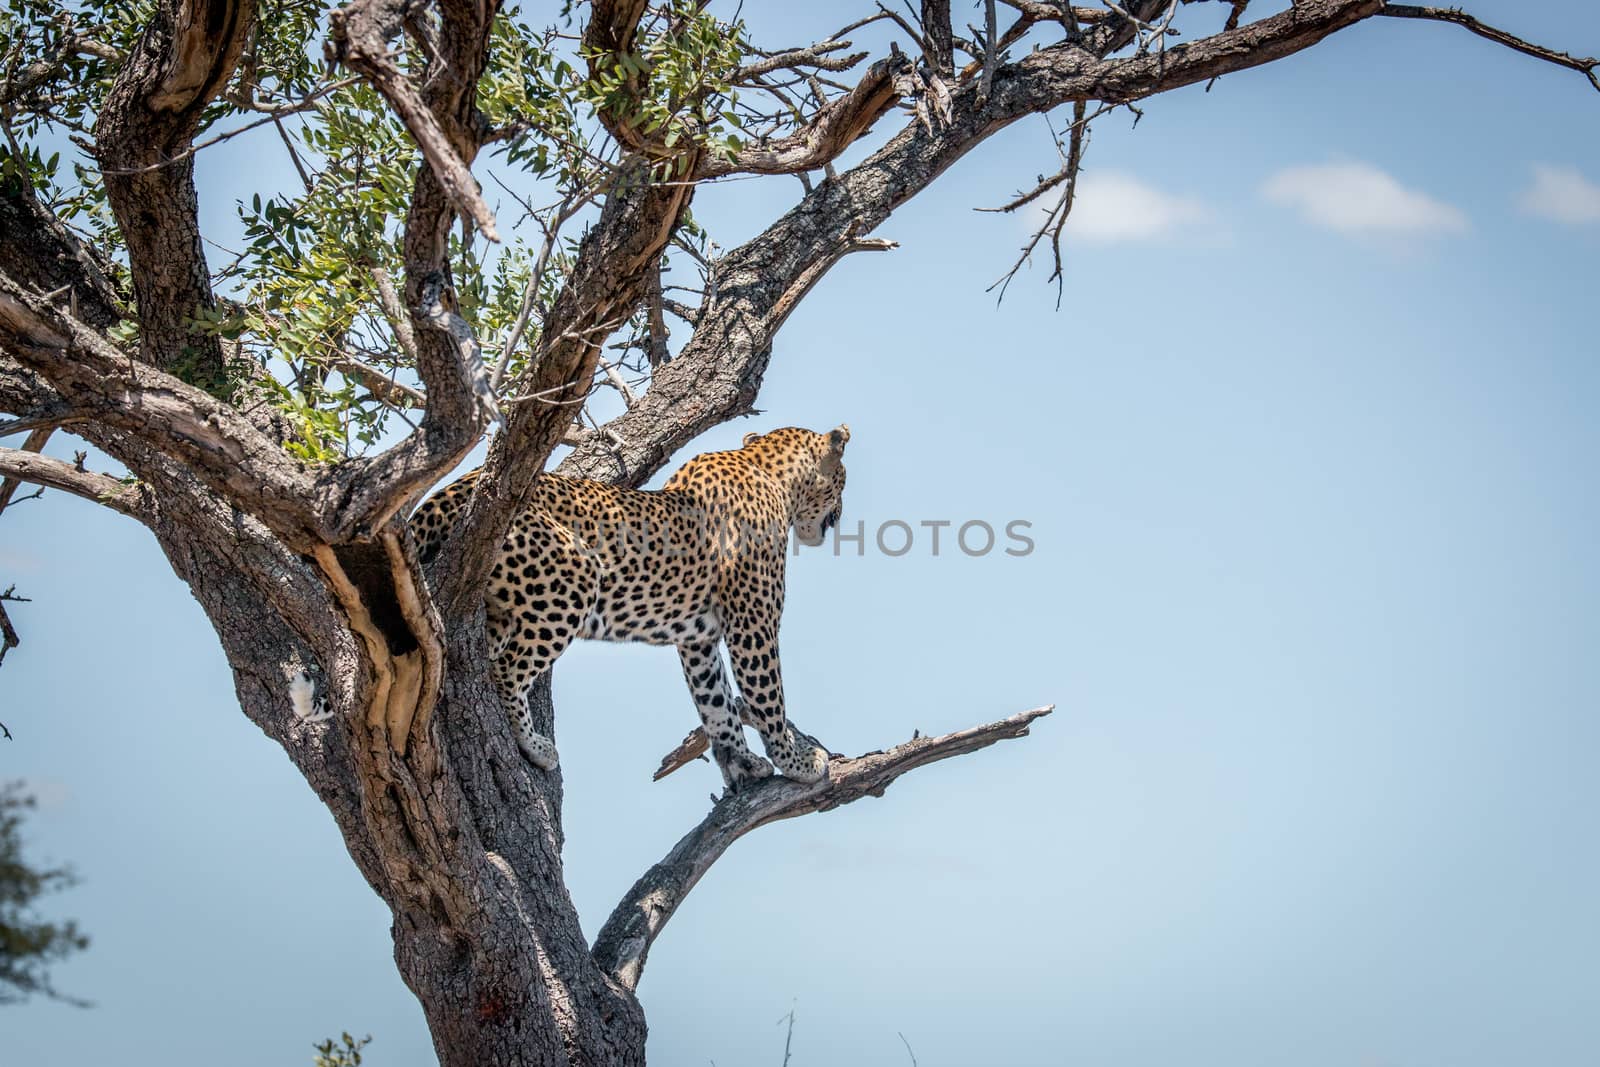 Leopard on the look out in a tree in the Kruger National Park, South Africa.